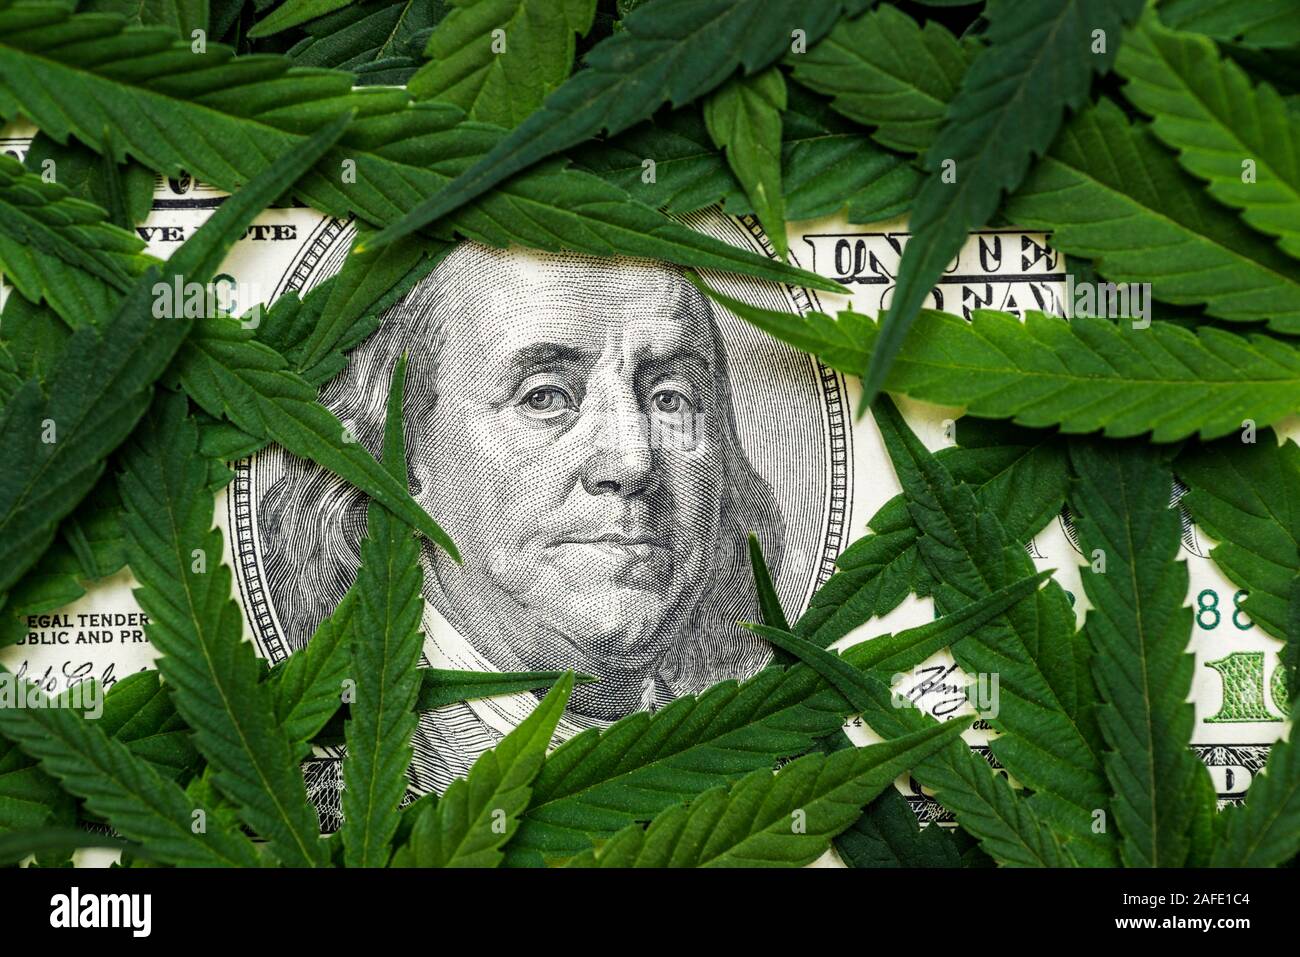 The face of Benjamin Franklin on the hundred dollar banknote among cannabis leaf. Money with marijuana leaves. Stock Photo